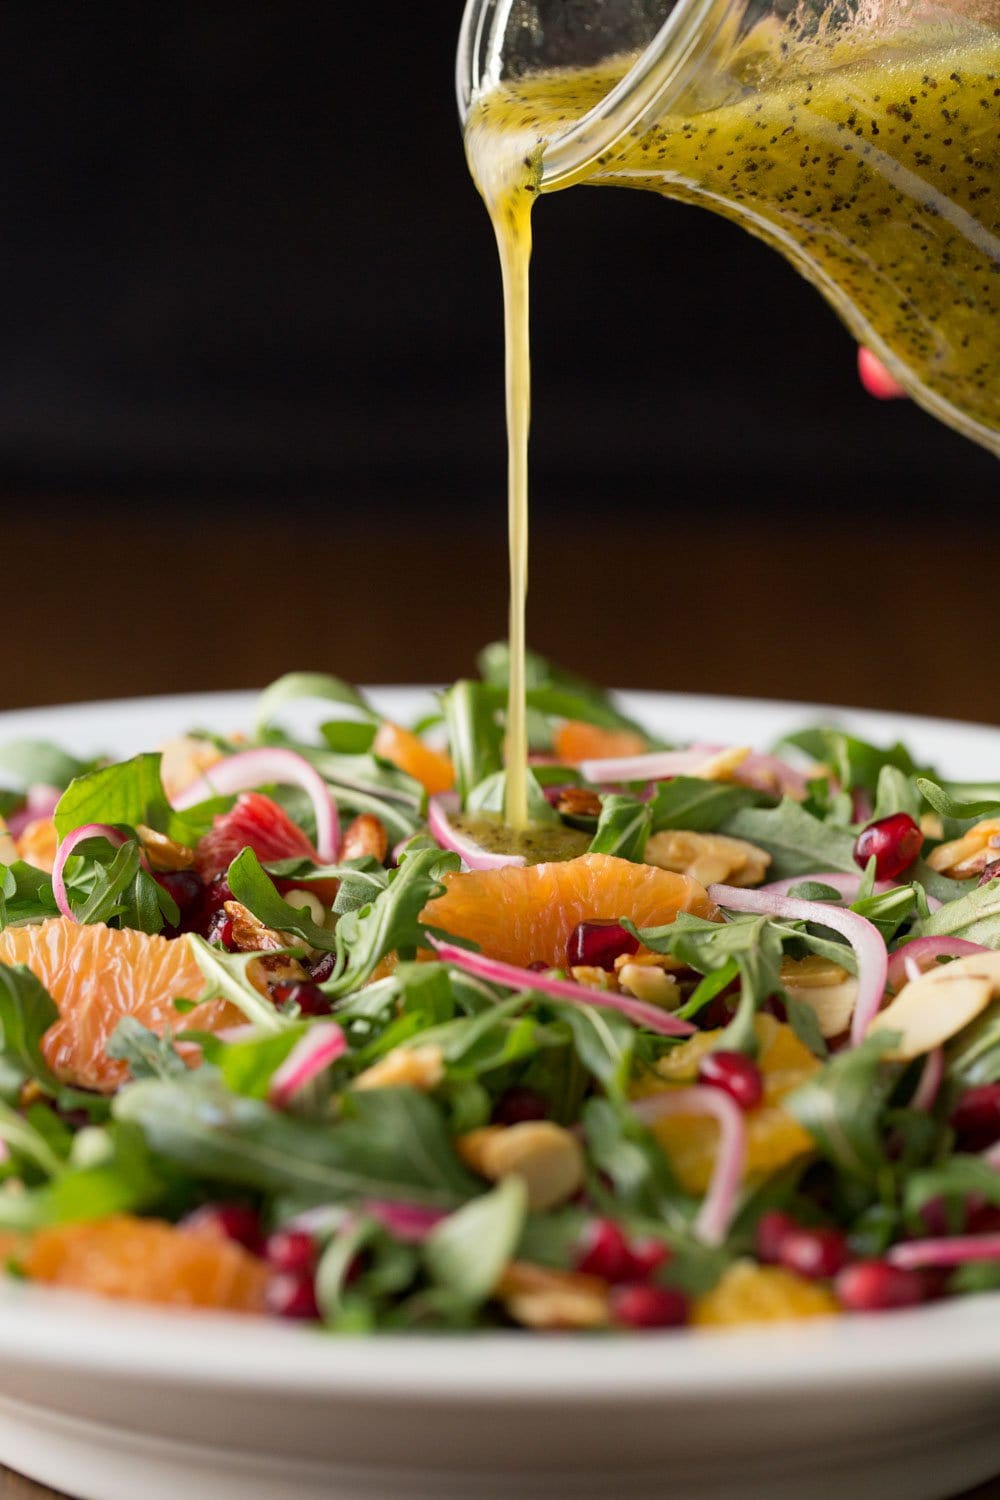 Photo of a fresh bowl of salad with Lemon Ginger Salad Dressing being poured over the salad from a glass carafe.